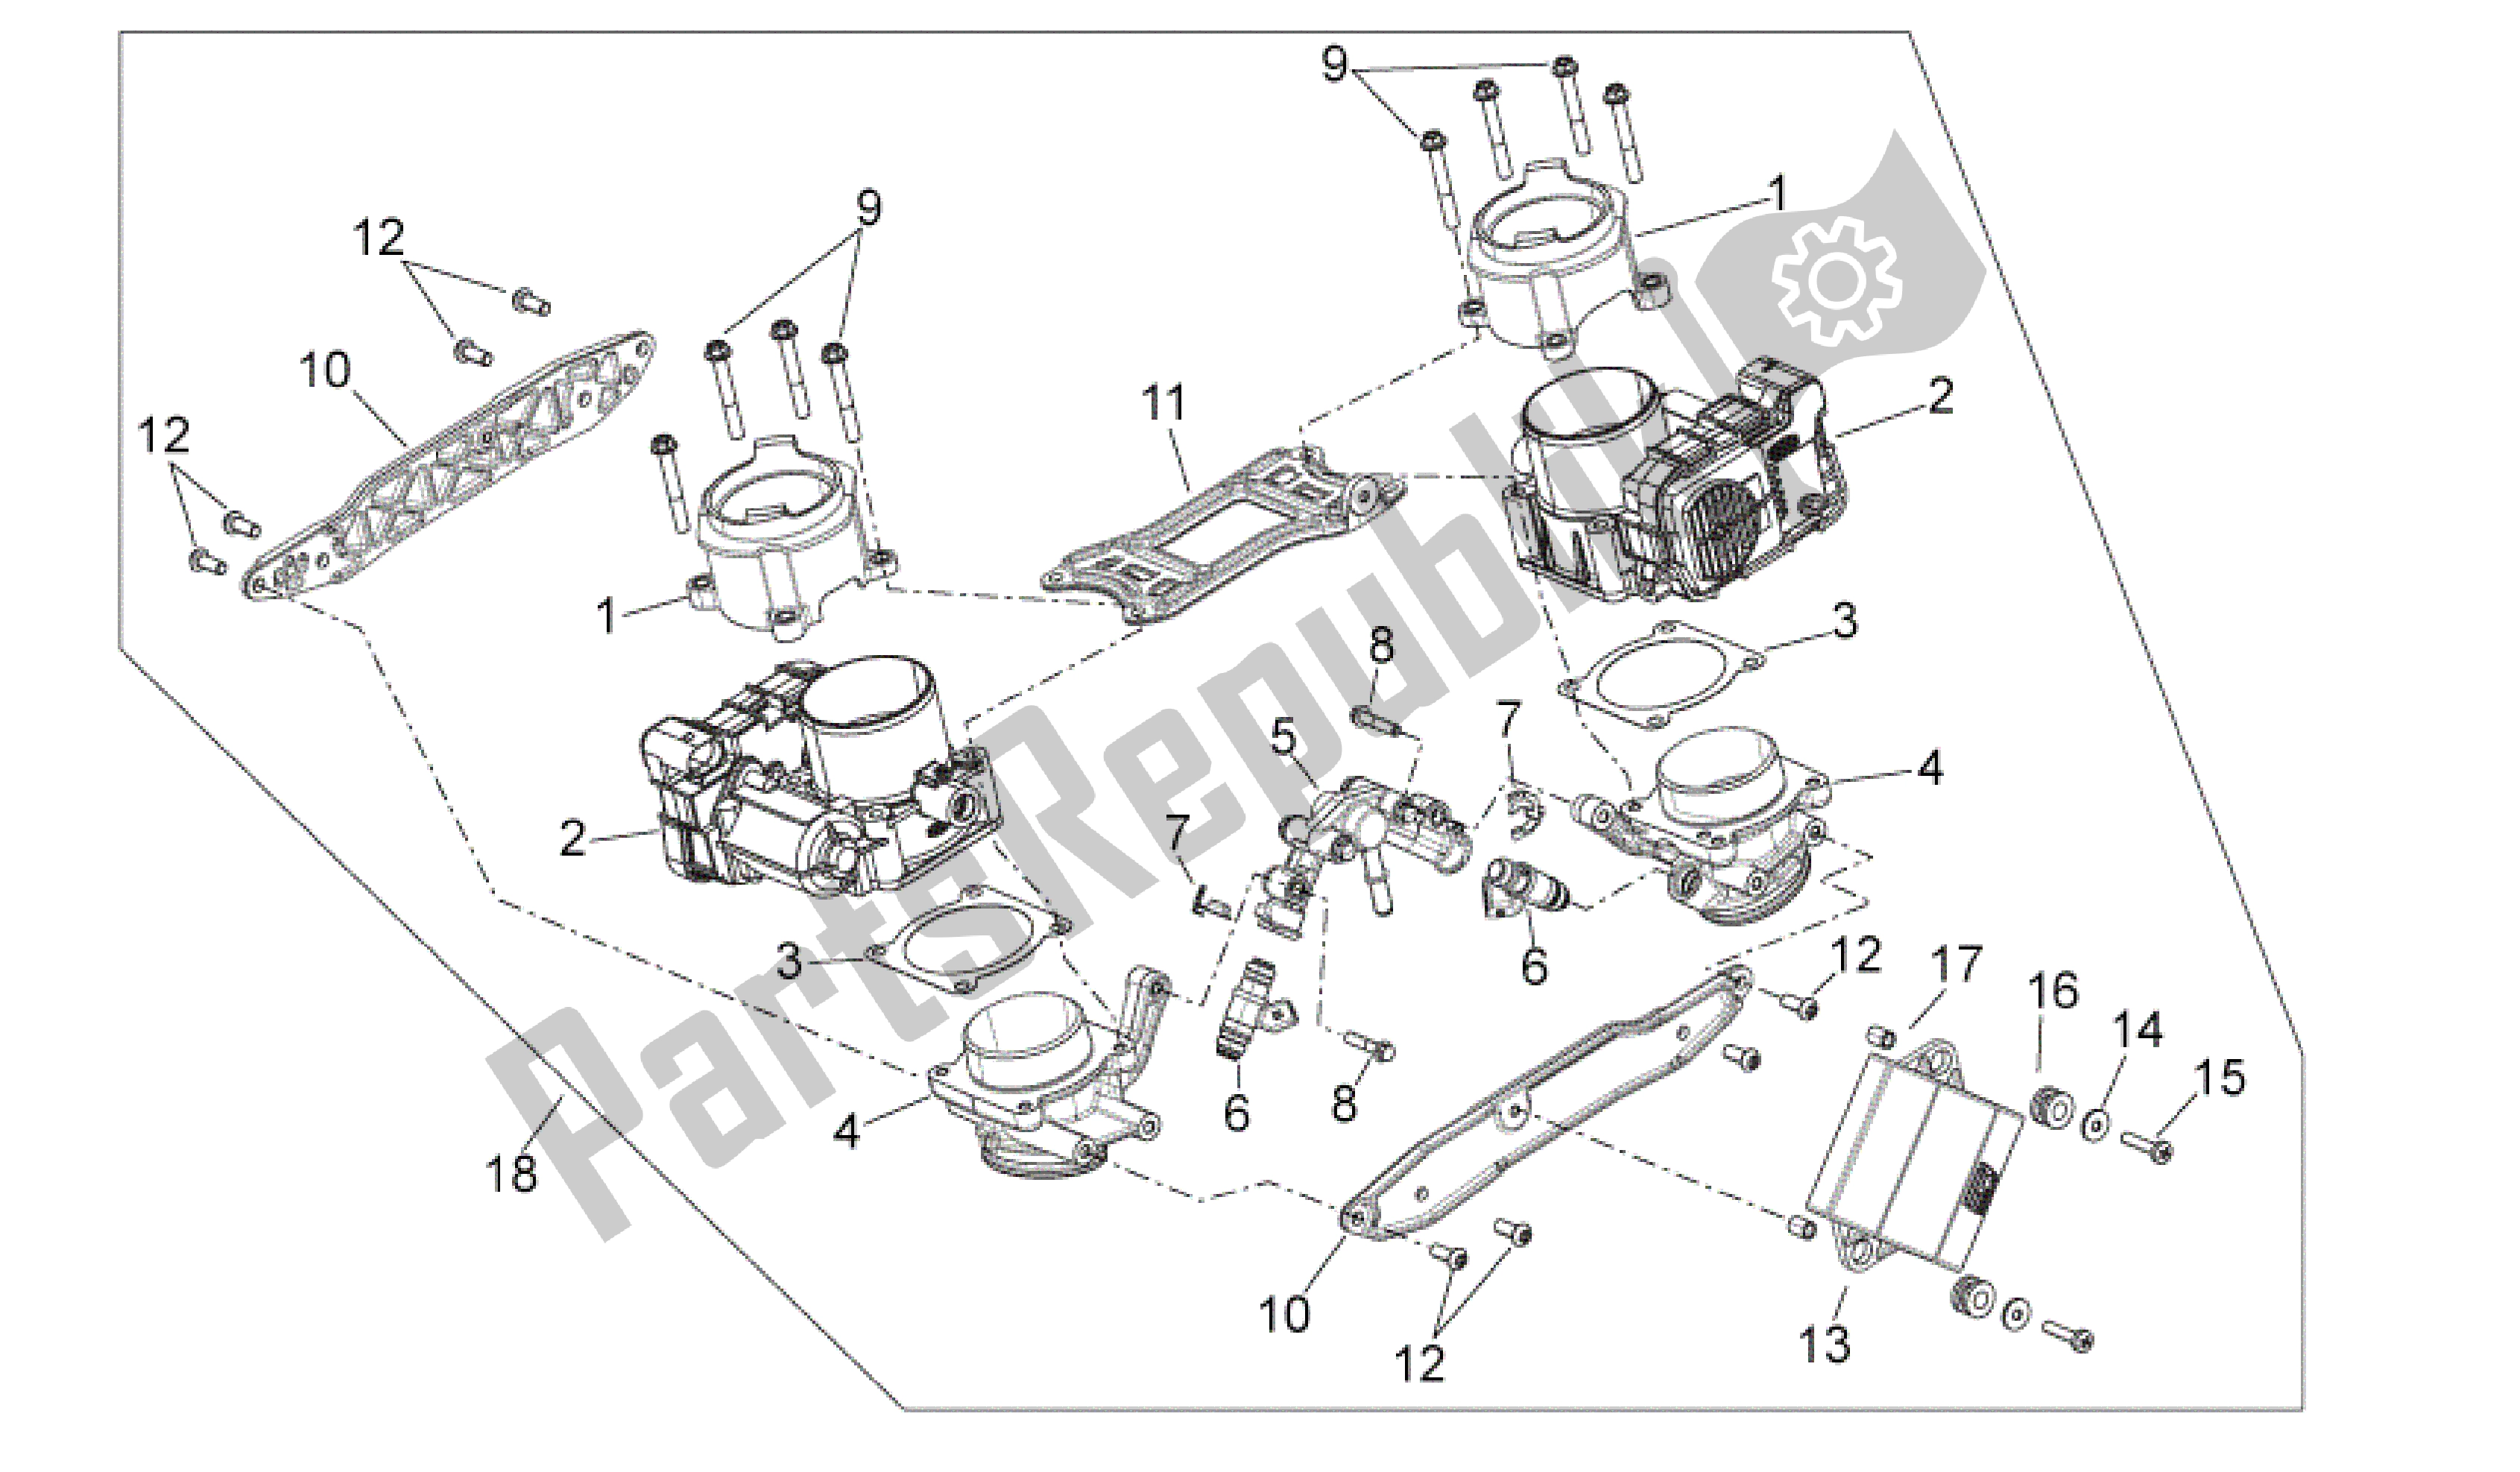 All parts for the Throttle Body of the Aprilia Shiver 750 2009